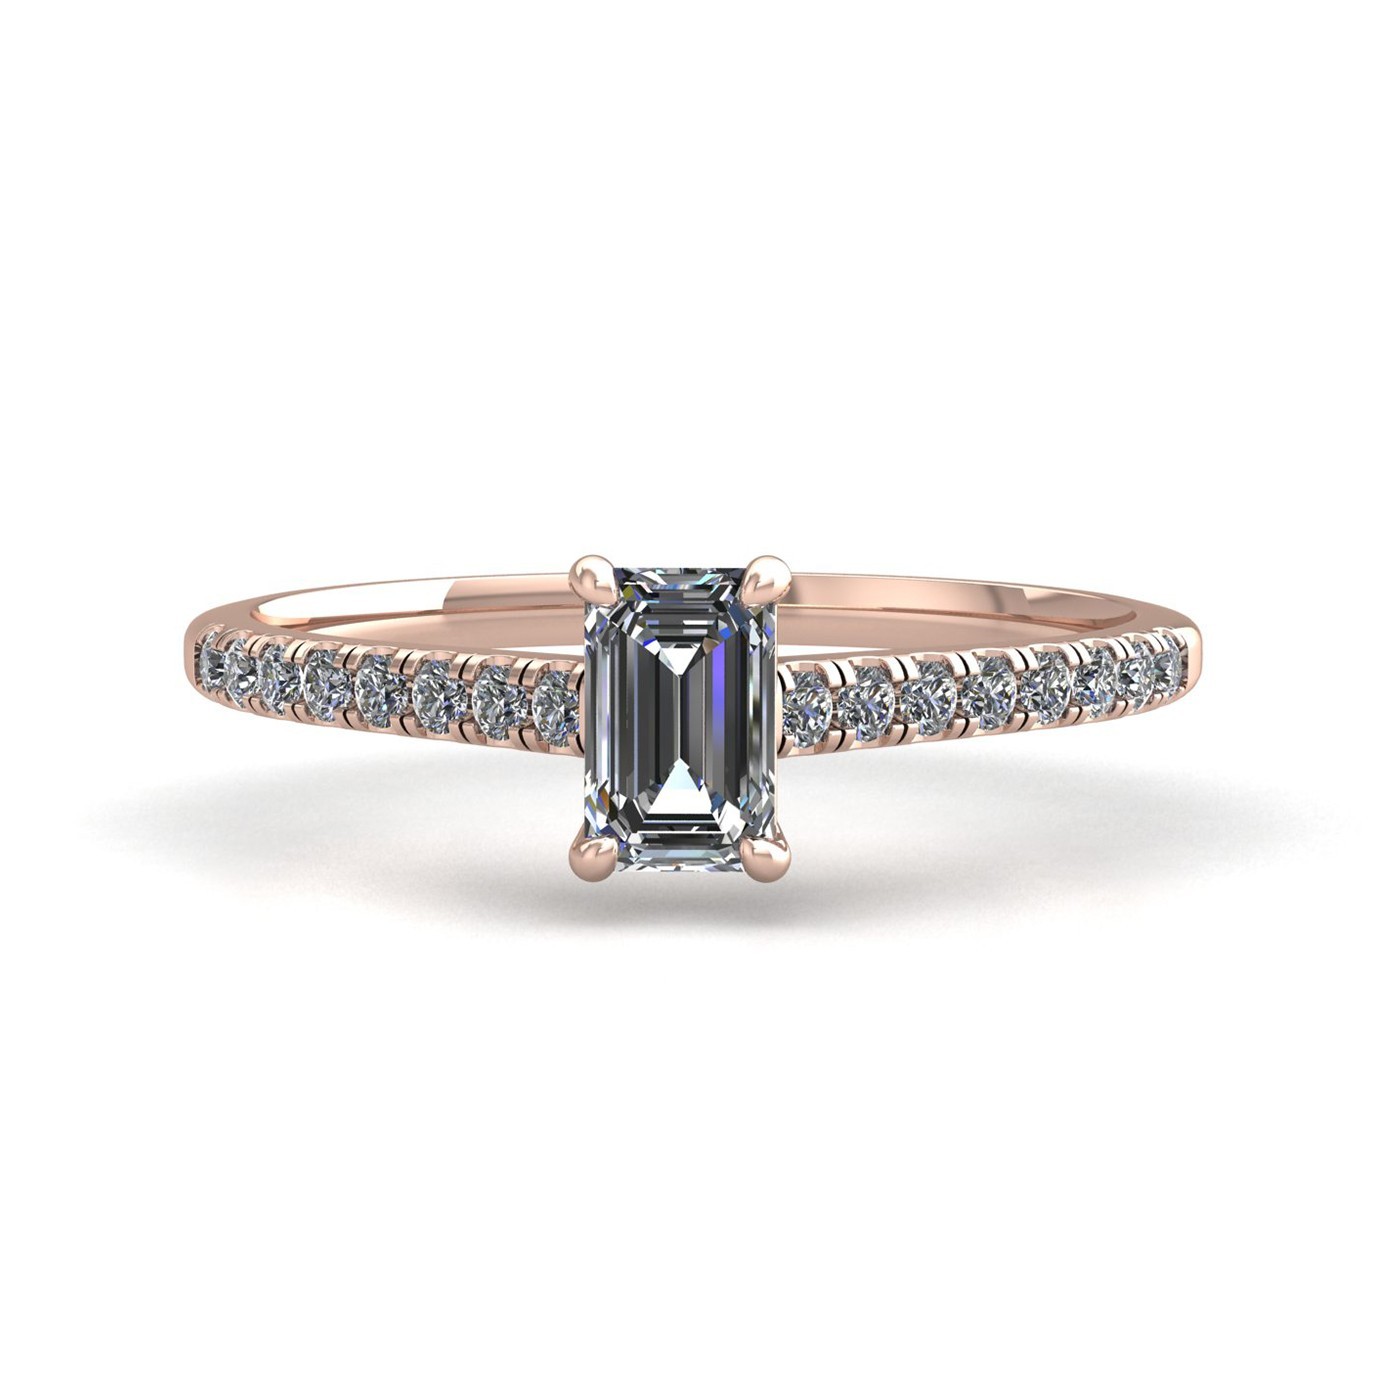 18k rose gold 0,80 ct 4 prongs emerald cut diamond engagement ring with whisper thin pavÉ set band Photos & images